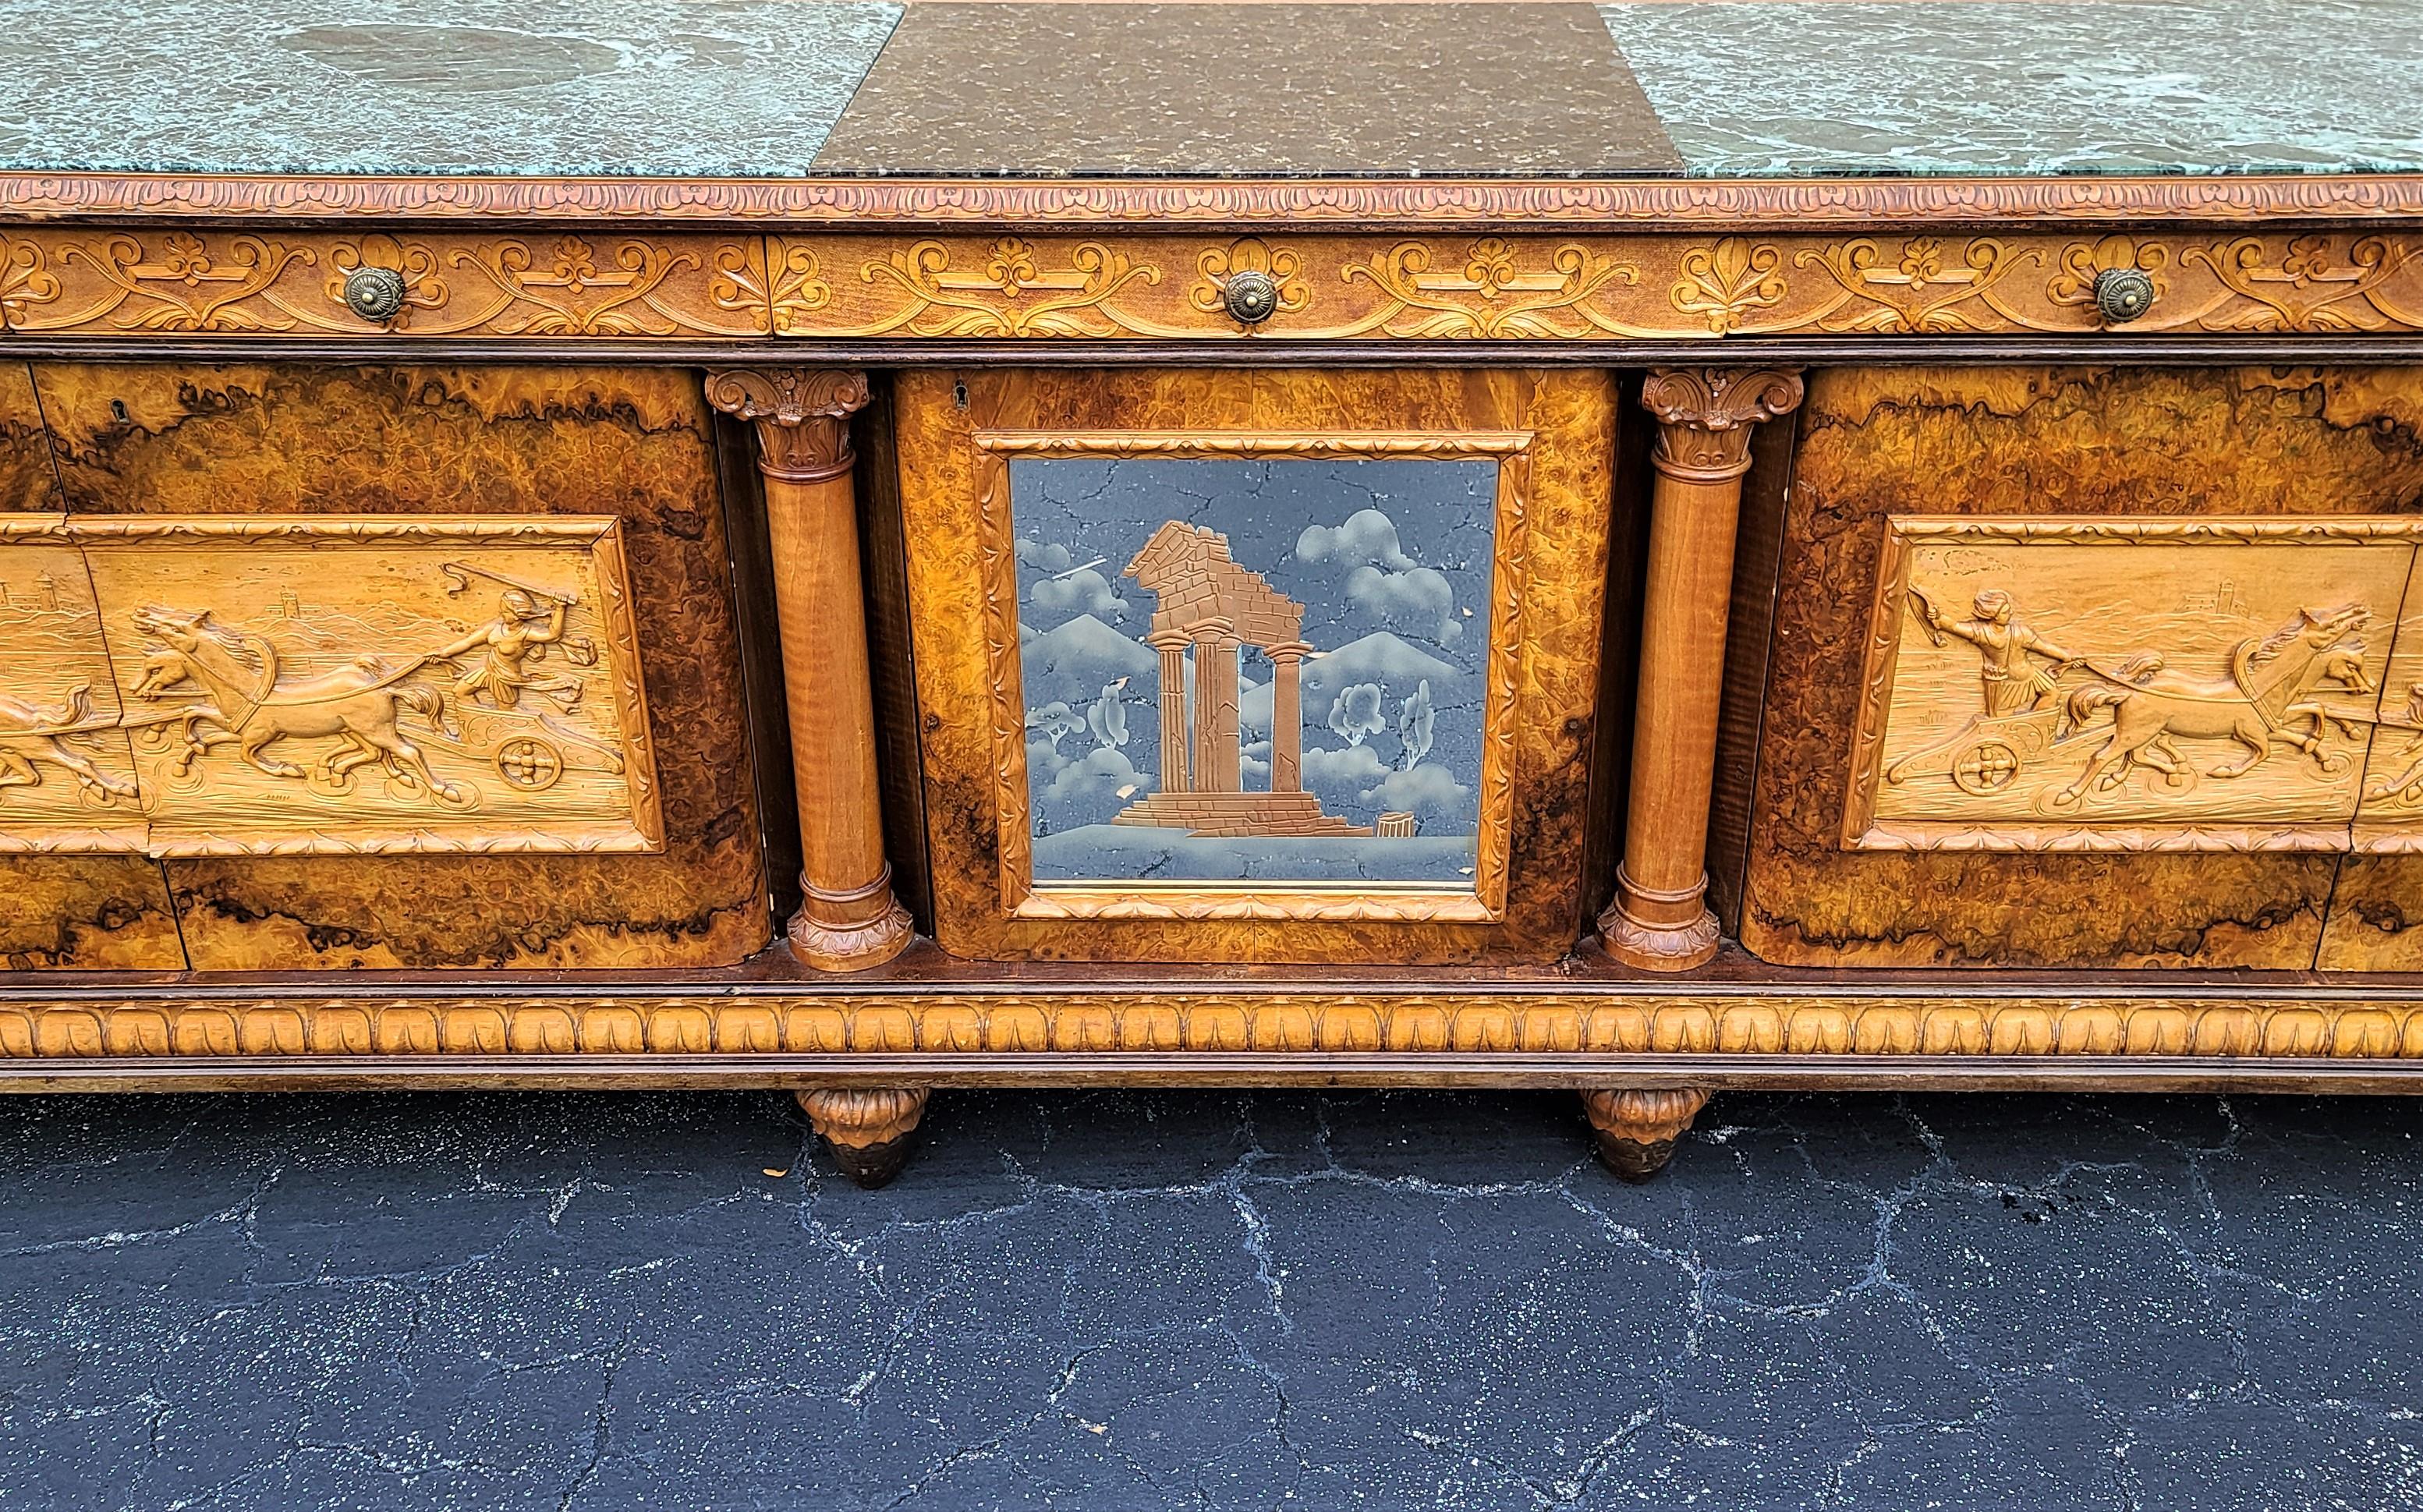 For FULL item description click on CONTINUE READING at the bottom of this page.

Offering one of our recent Palm Beach estate fine furniture acquisitions of an
Antique c 1900 hand carved Neoclassical Italian credenza bar cabinet

Featuring all